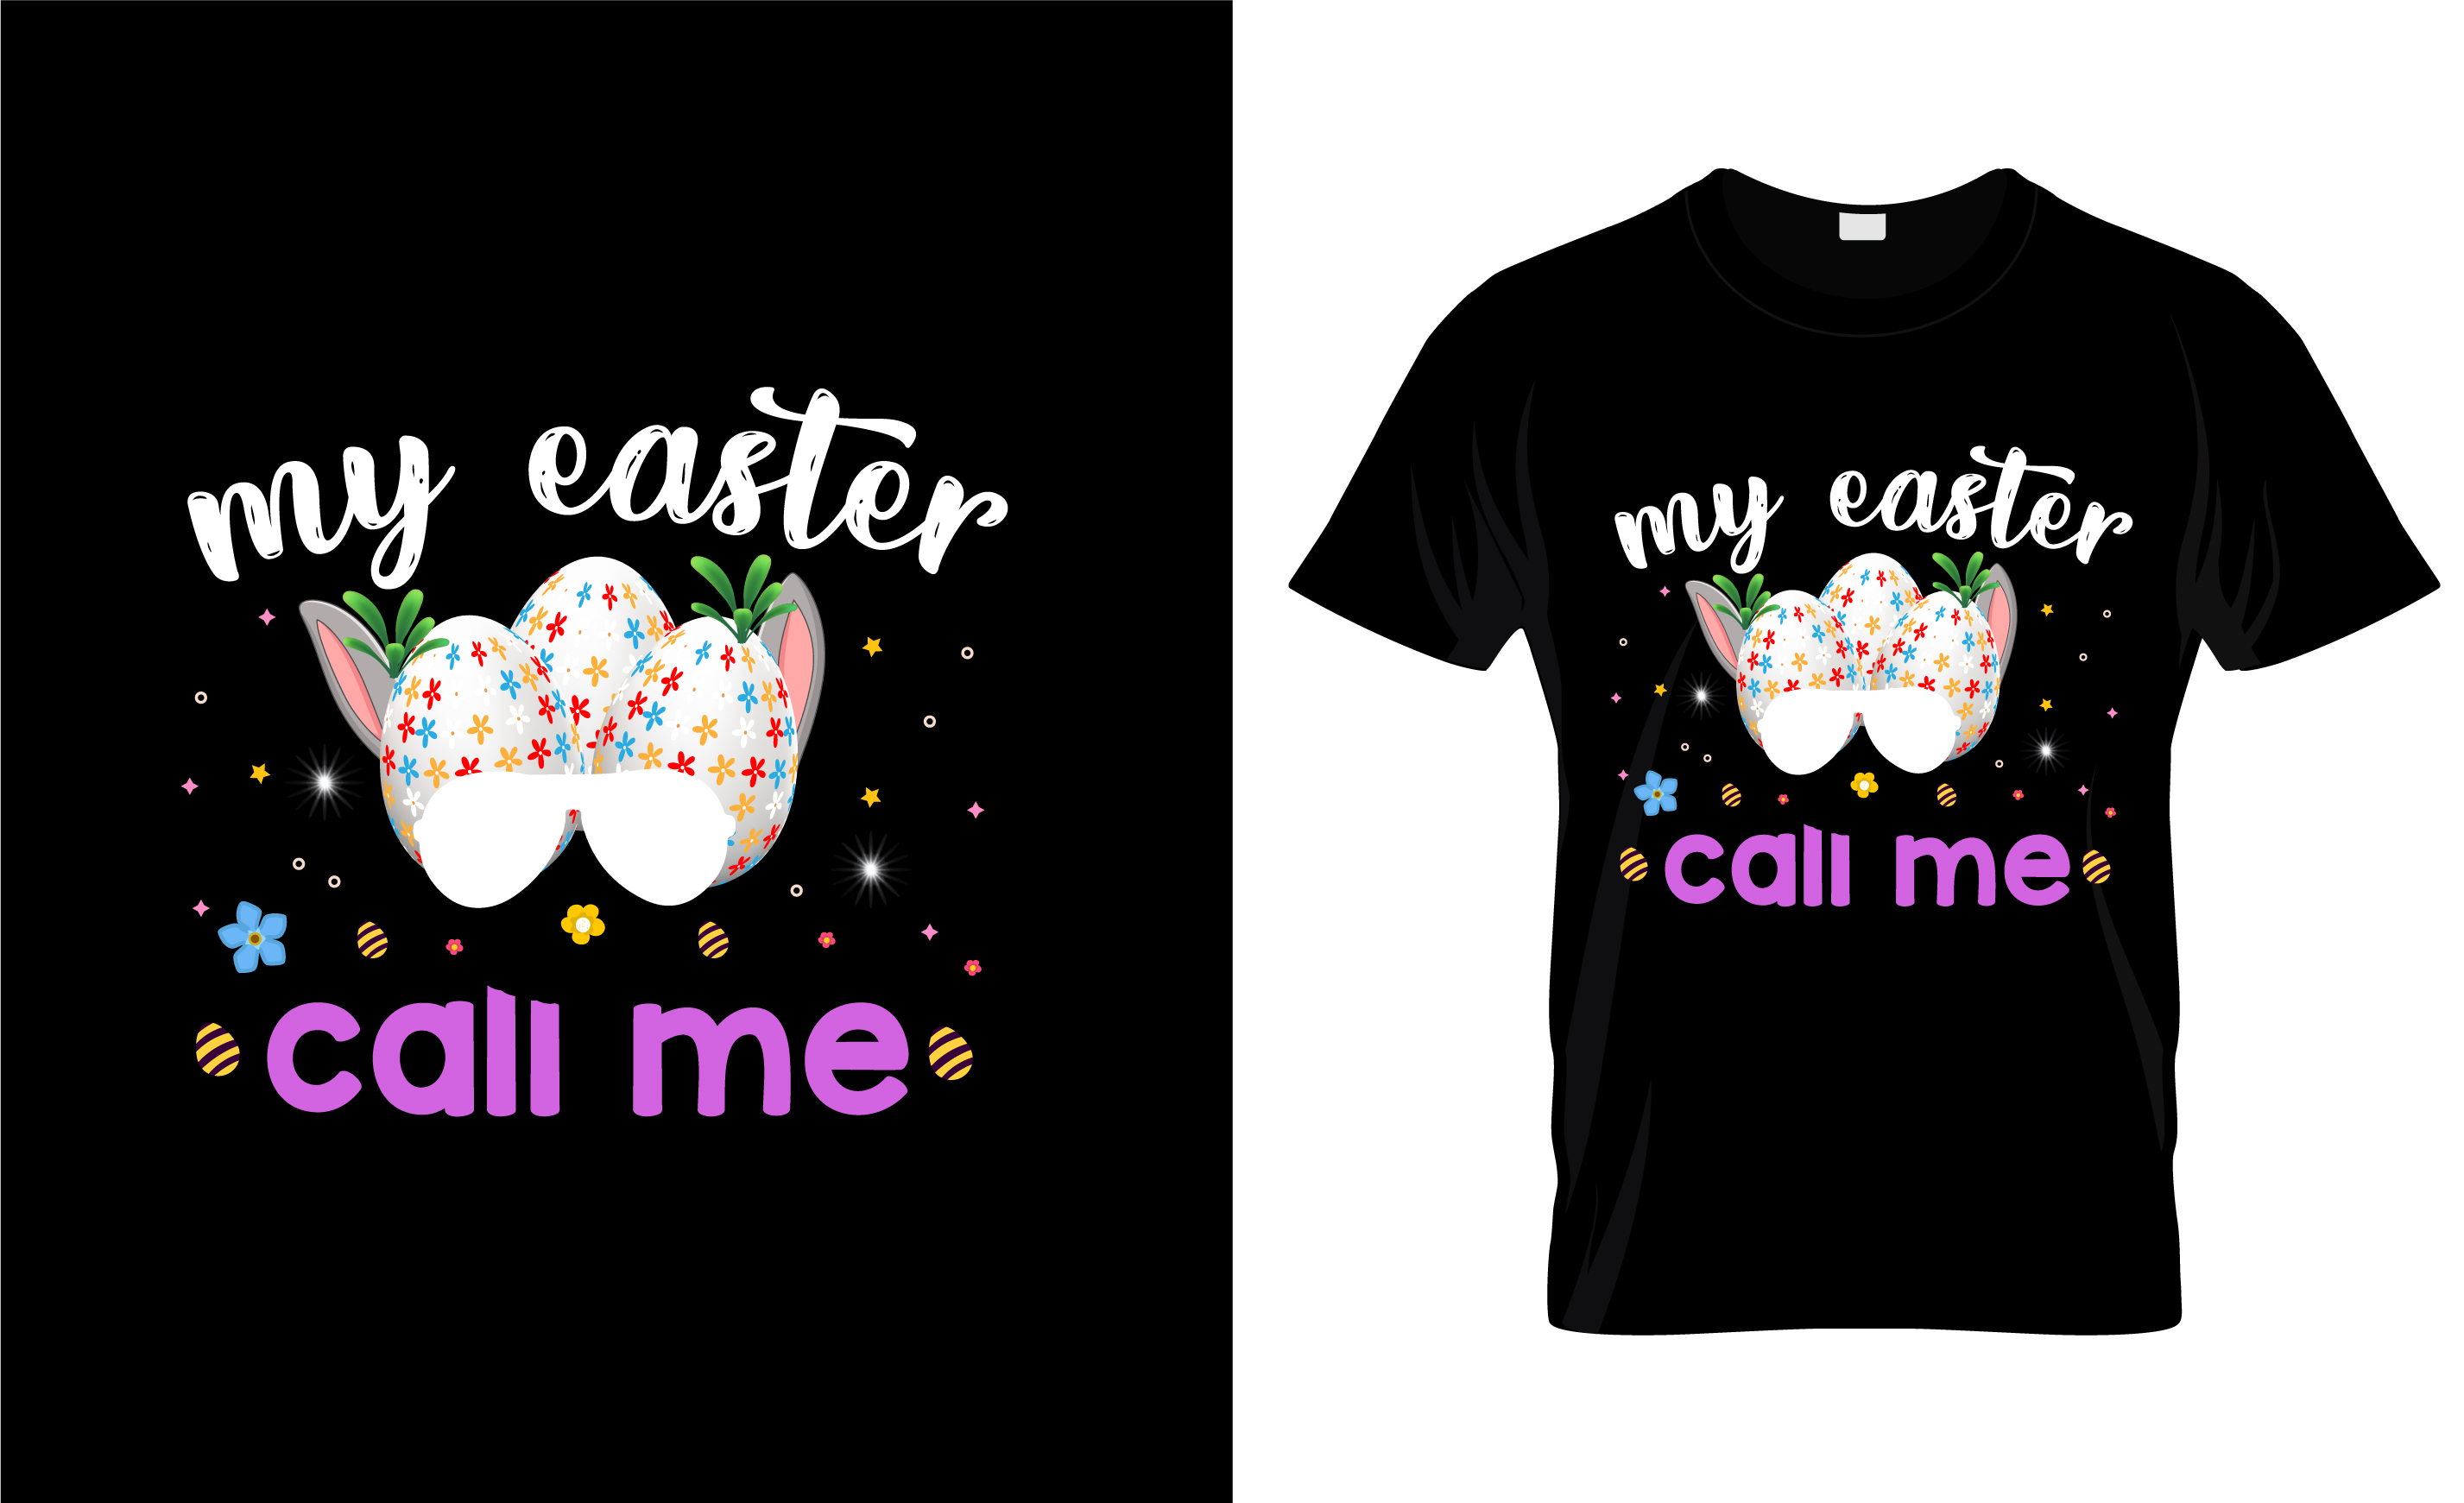 Image of a black t-shirt with an enchanting print of easter eggs